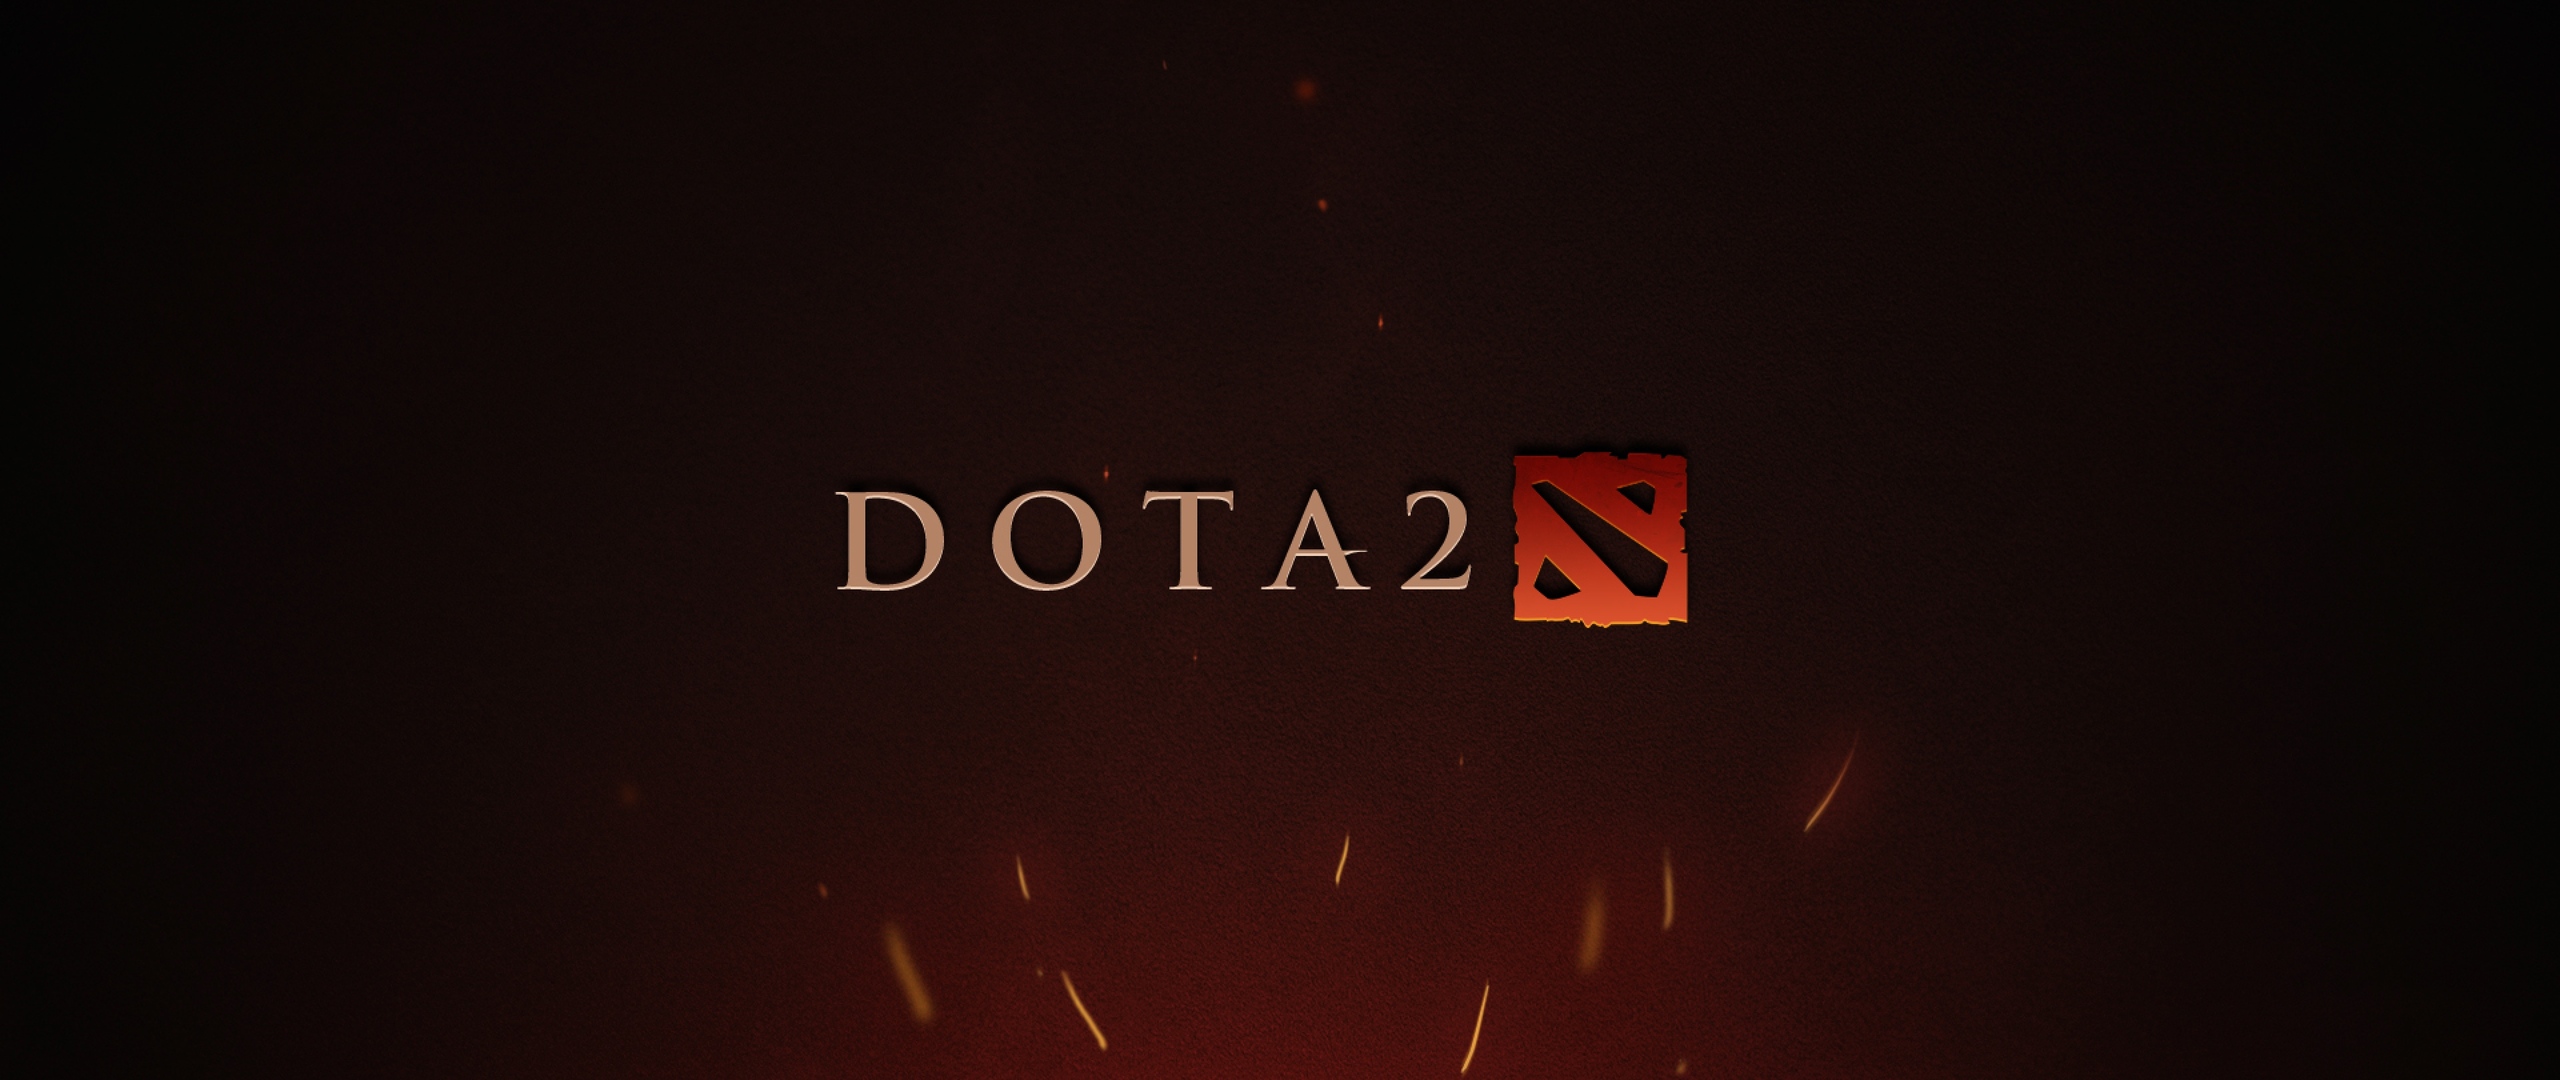 Dota 2 free to play or not фото 89